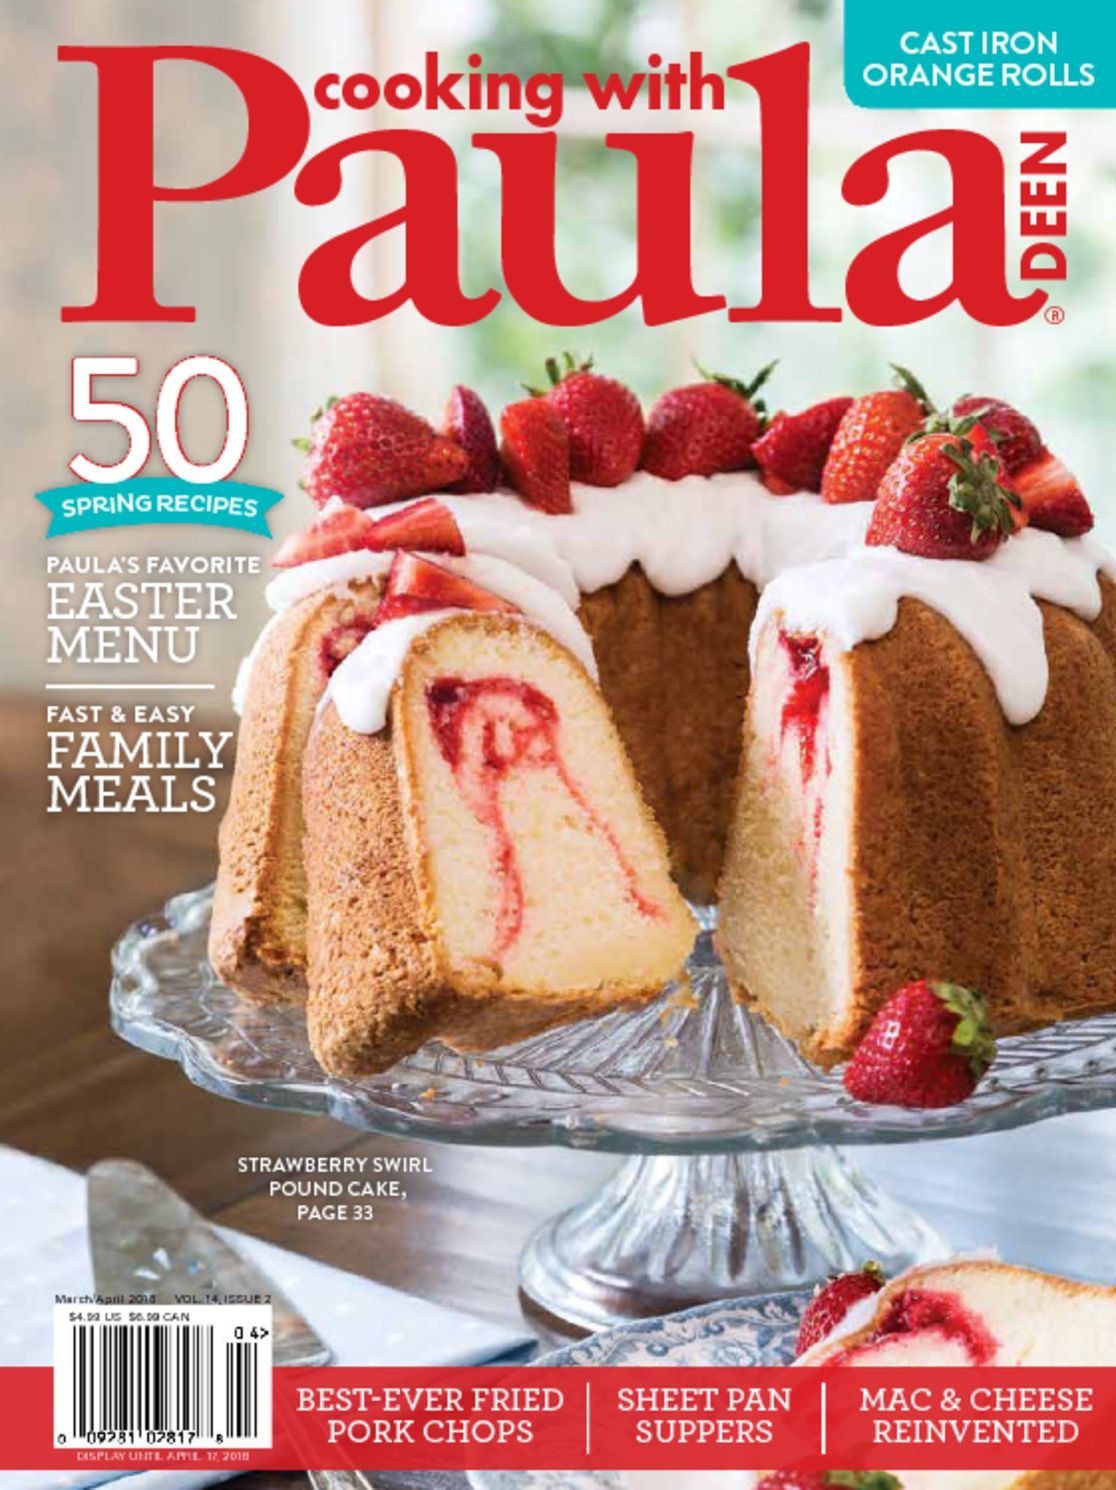 Cooking With Paula Deen Magazine - DiscountMags.com